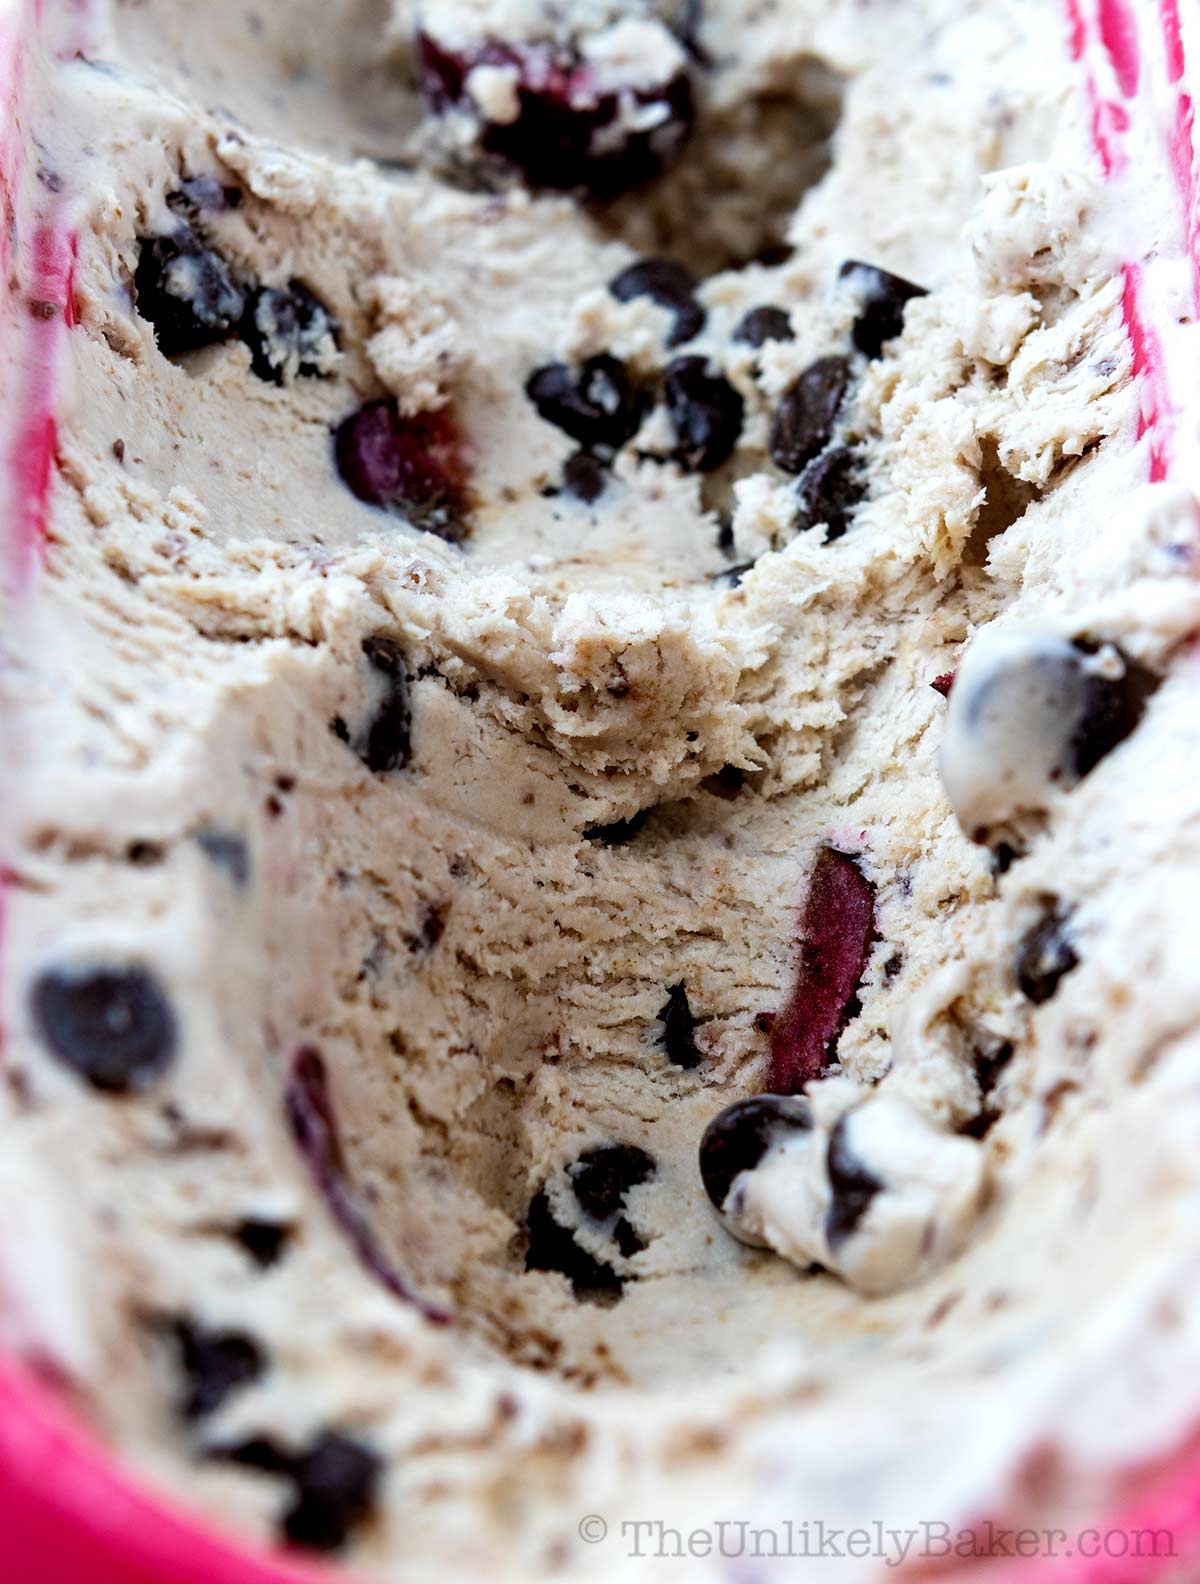 Homemade cherry chocolate chip ice cream in a tub.